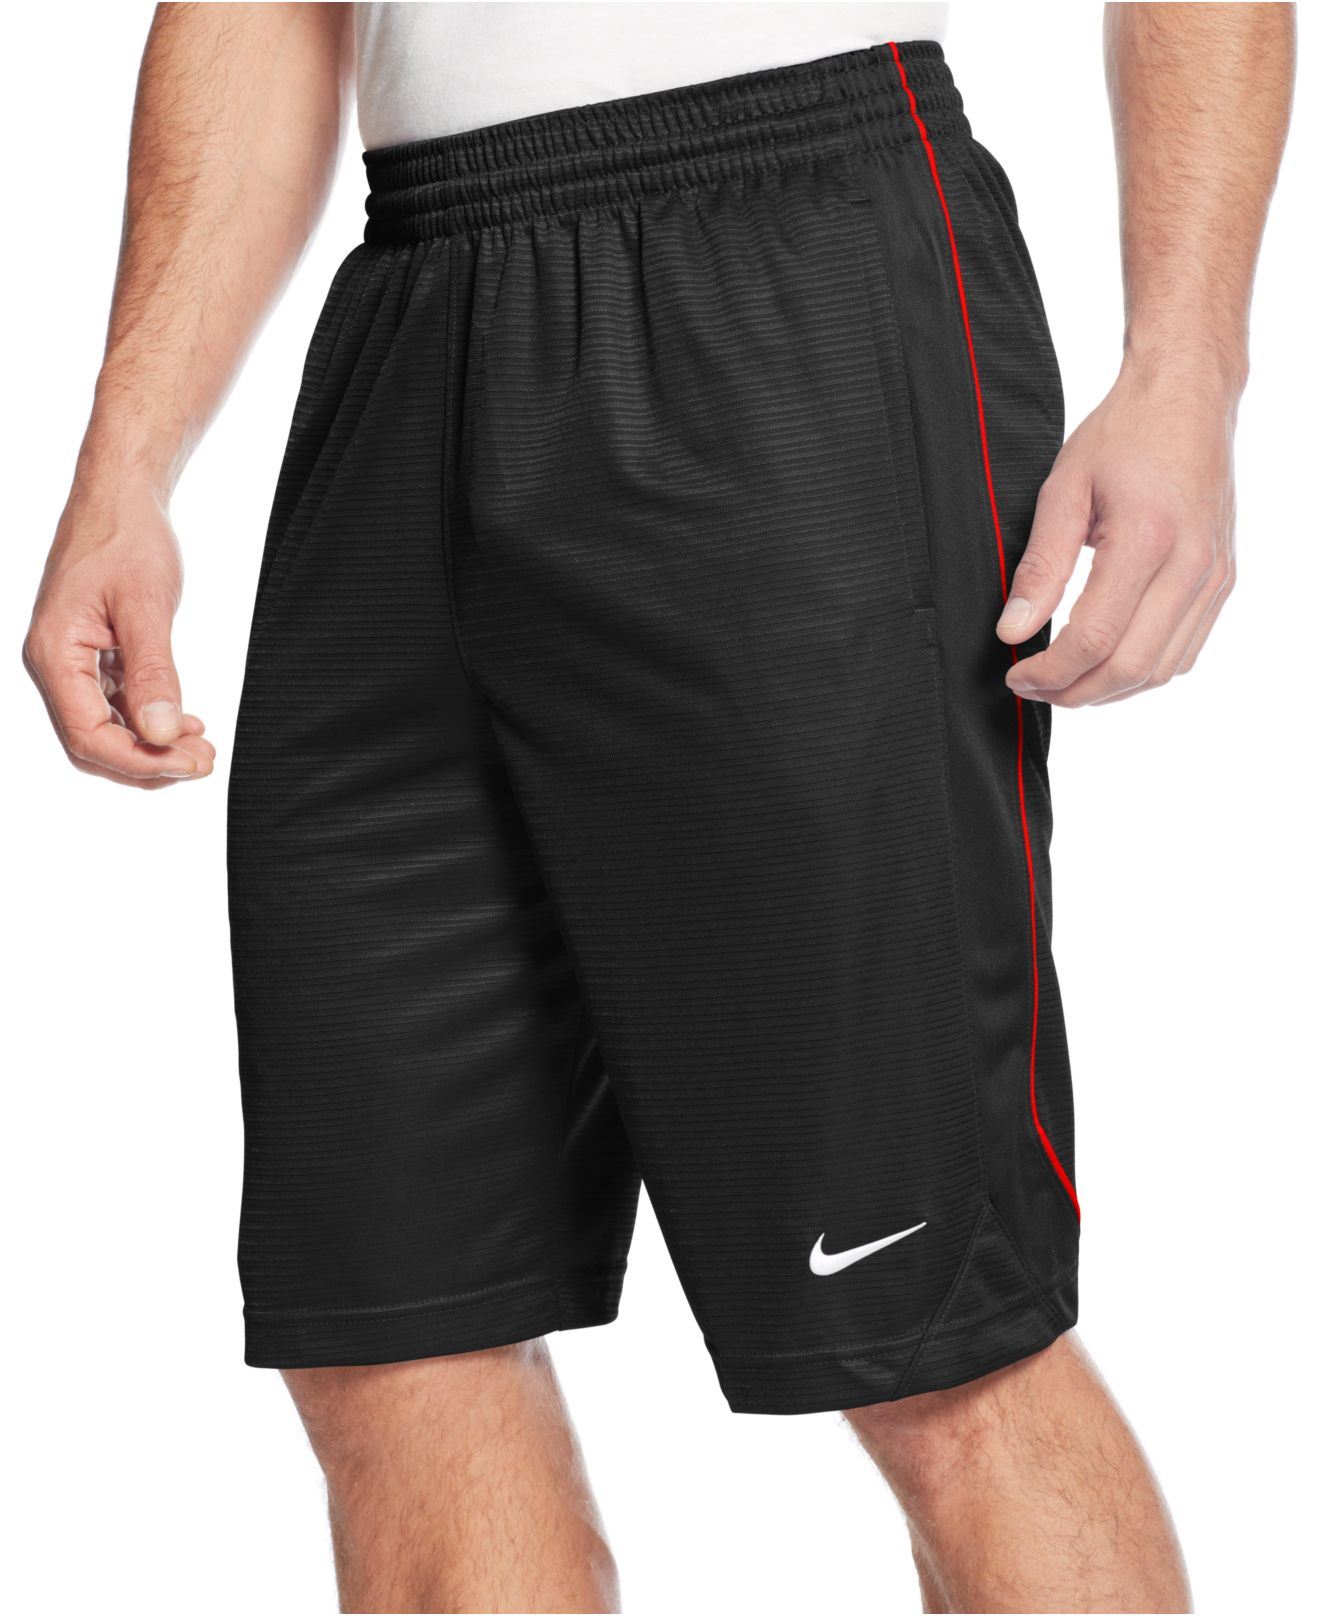 6 Day Nike layup workout shorts for Weight Loss